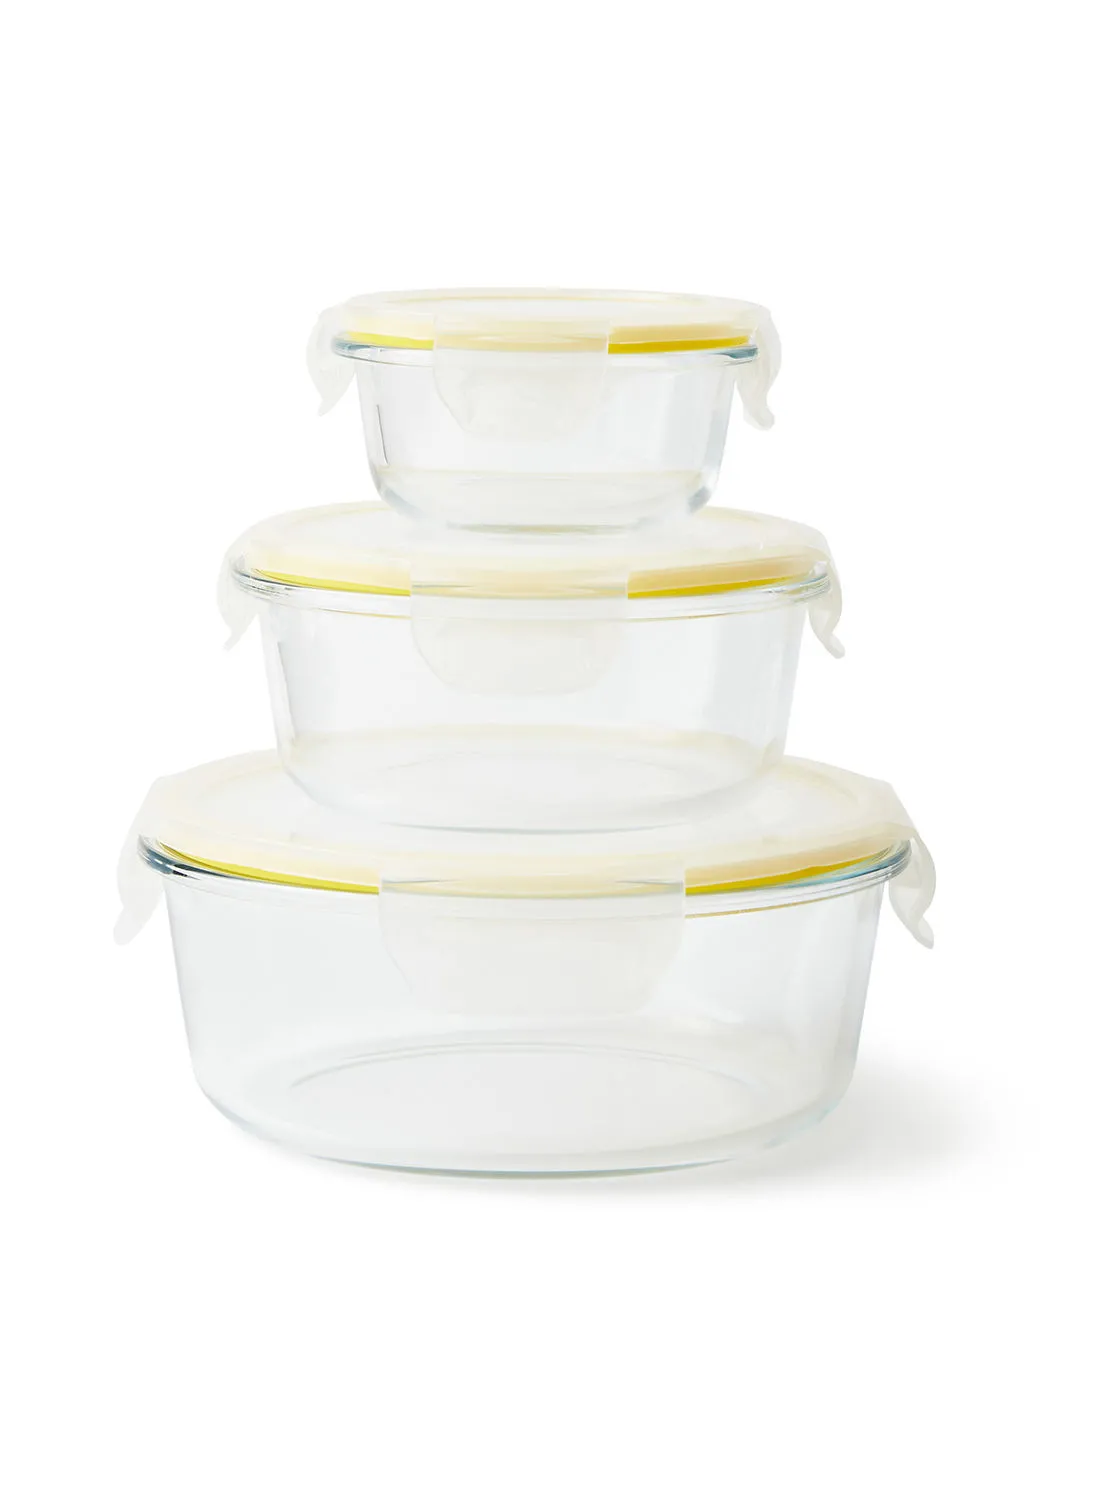 noon east 3 Piece Borosilicate Glass Food Container Set - Airtight Lids - Lunch Box - Round (Large) - Food Storage Box - Storage Boxes - Kitchen Cabinet Organizers - Glass Food Container - Yellow